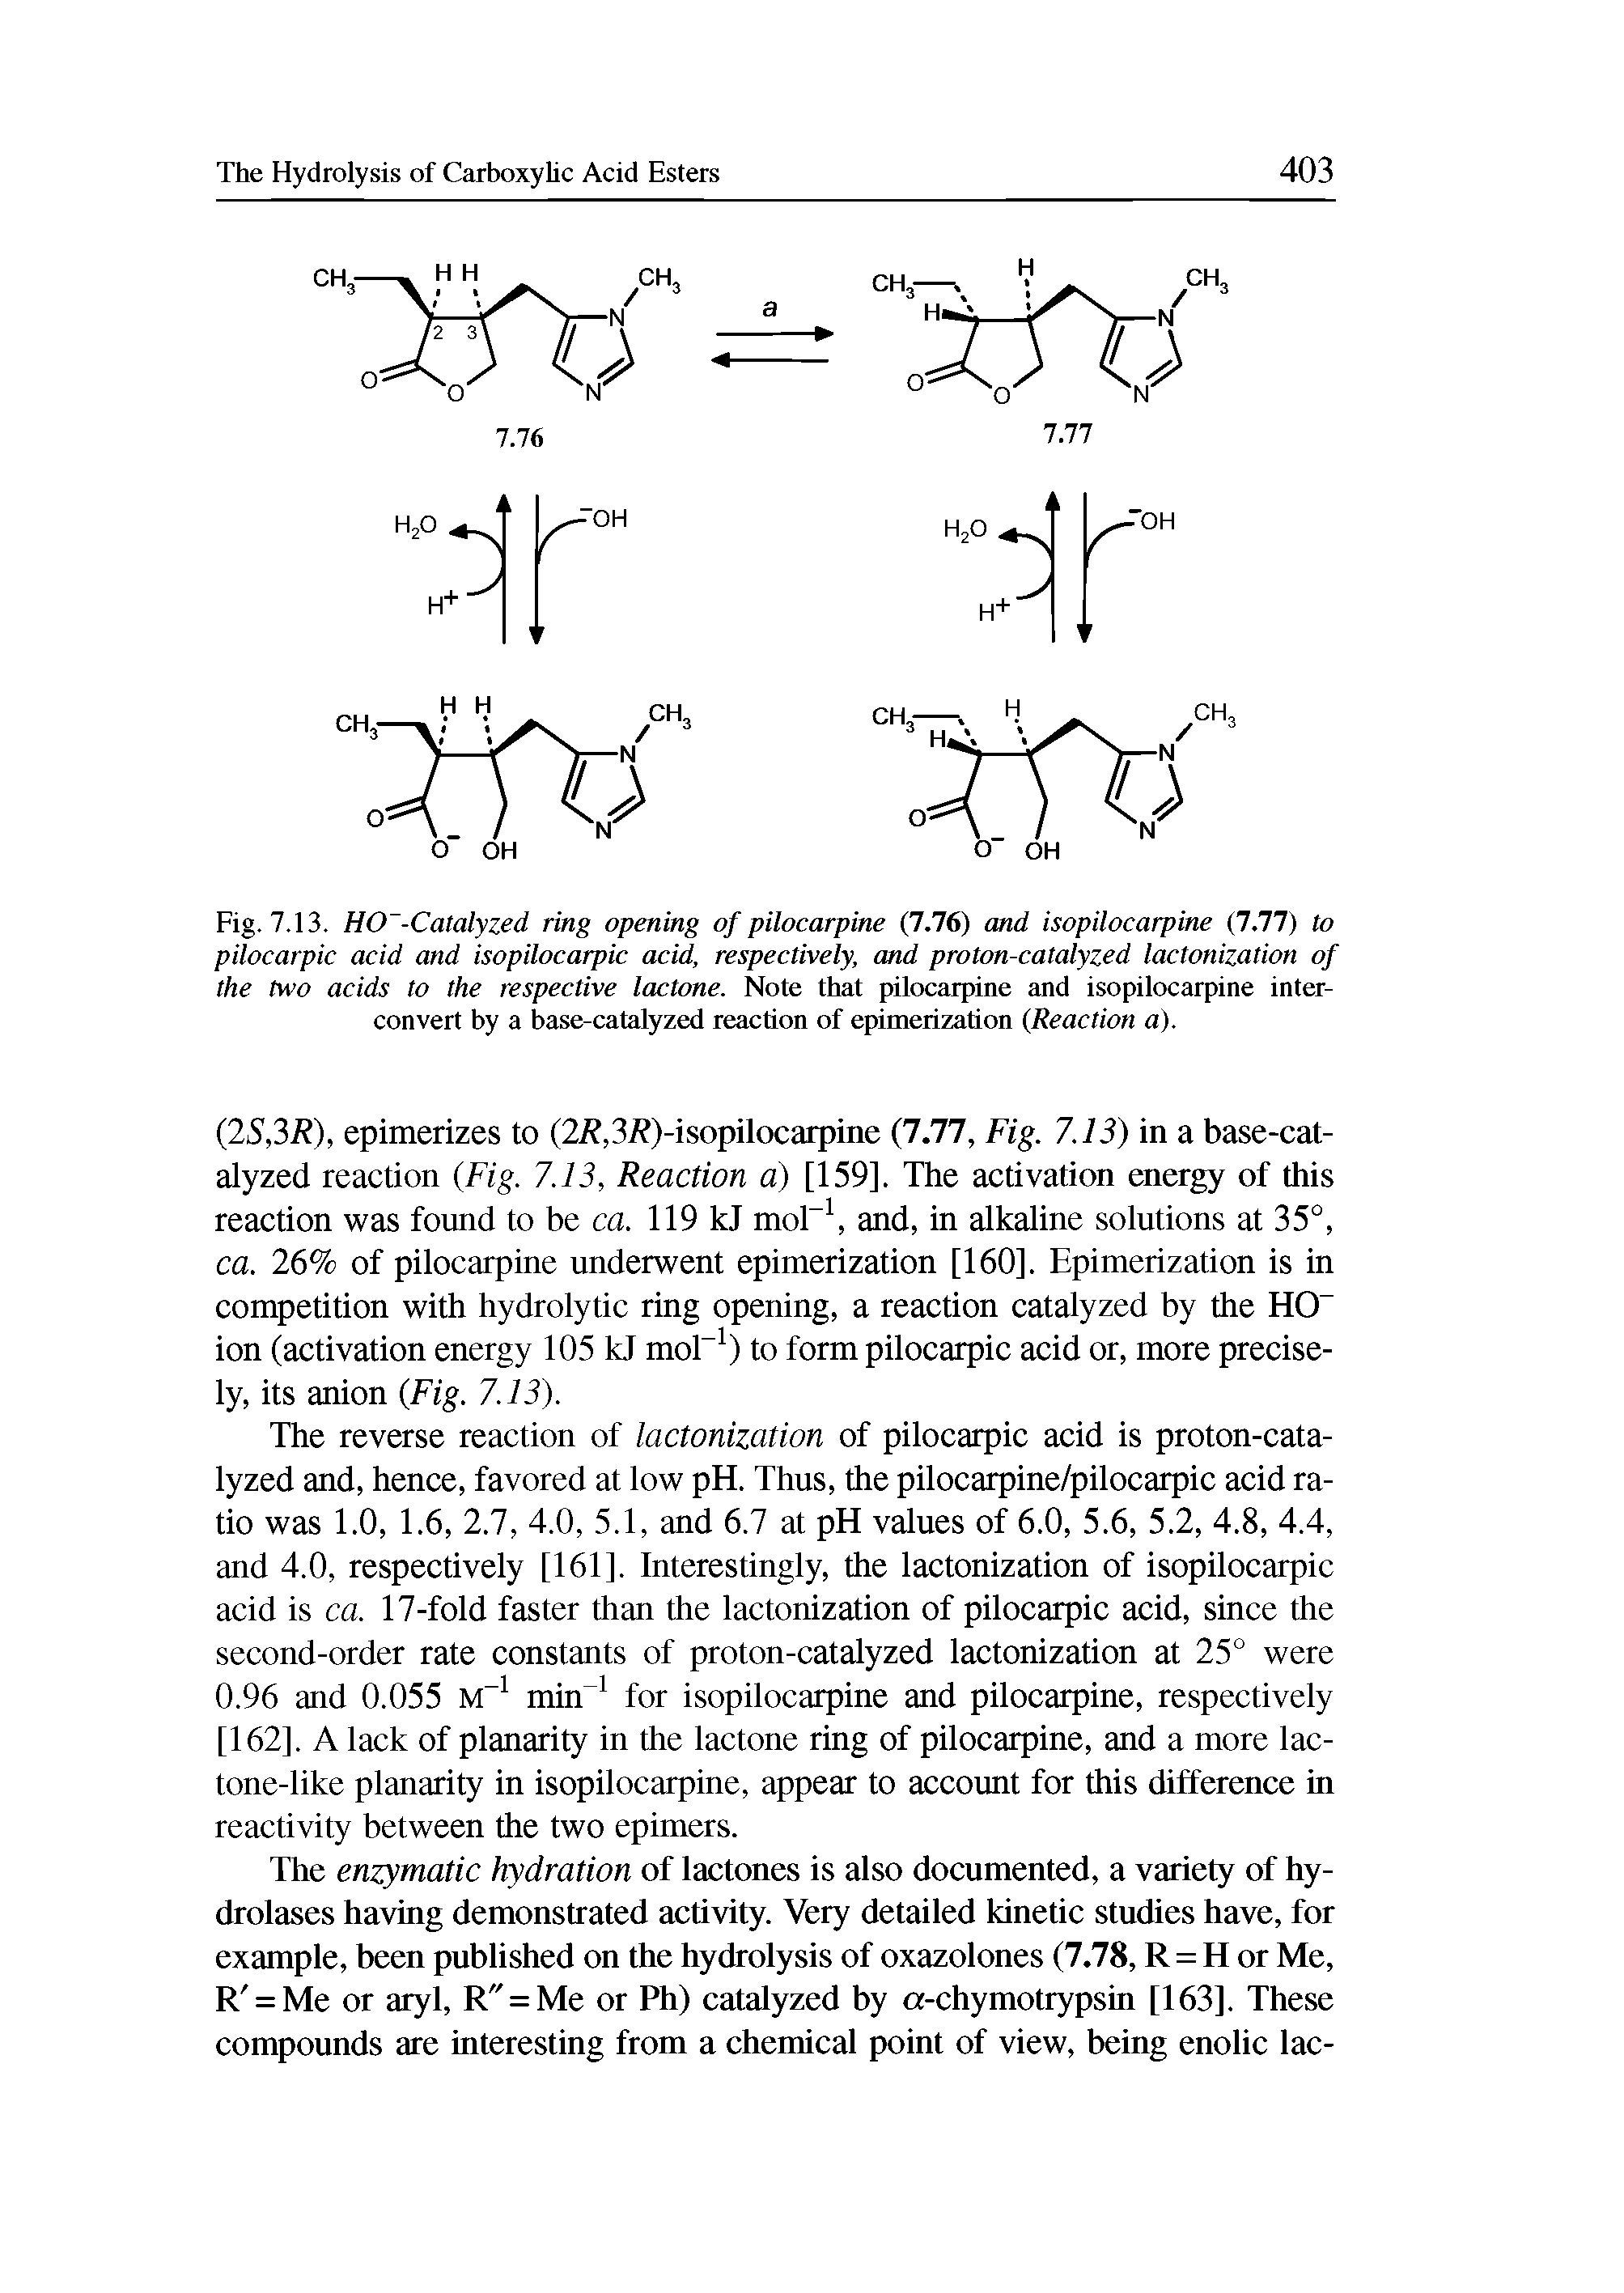 Fig. 7.13. HO -Catalyzed ring opening of pilocarpine (7.76) and isopilocarpine (7.77) to pilocarpic acid and isopilocarpic acid, respectively, and proton-catalyzed lactonization of the two acids to the respective lactone. Note that pilocarpine and isopilocarpine interconvert by a base-catalyzed reaction of epimerization (Reaction a).